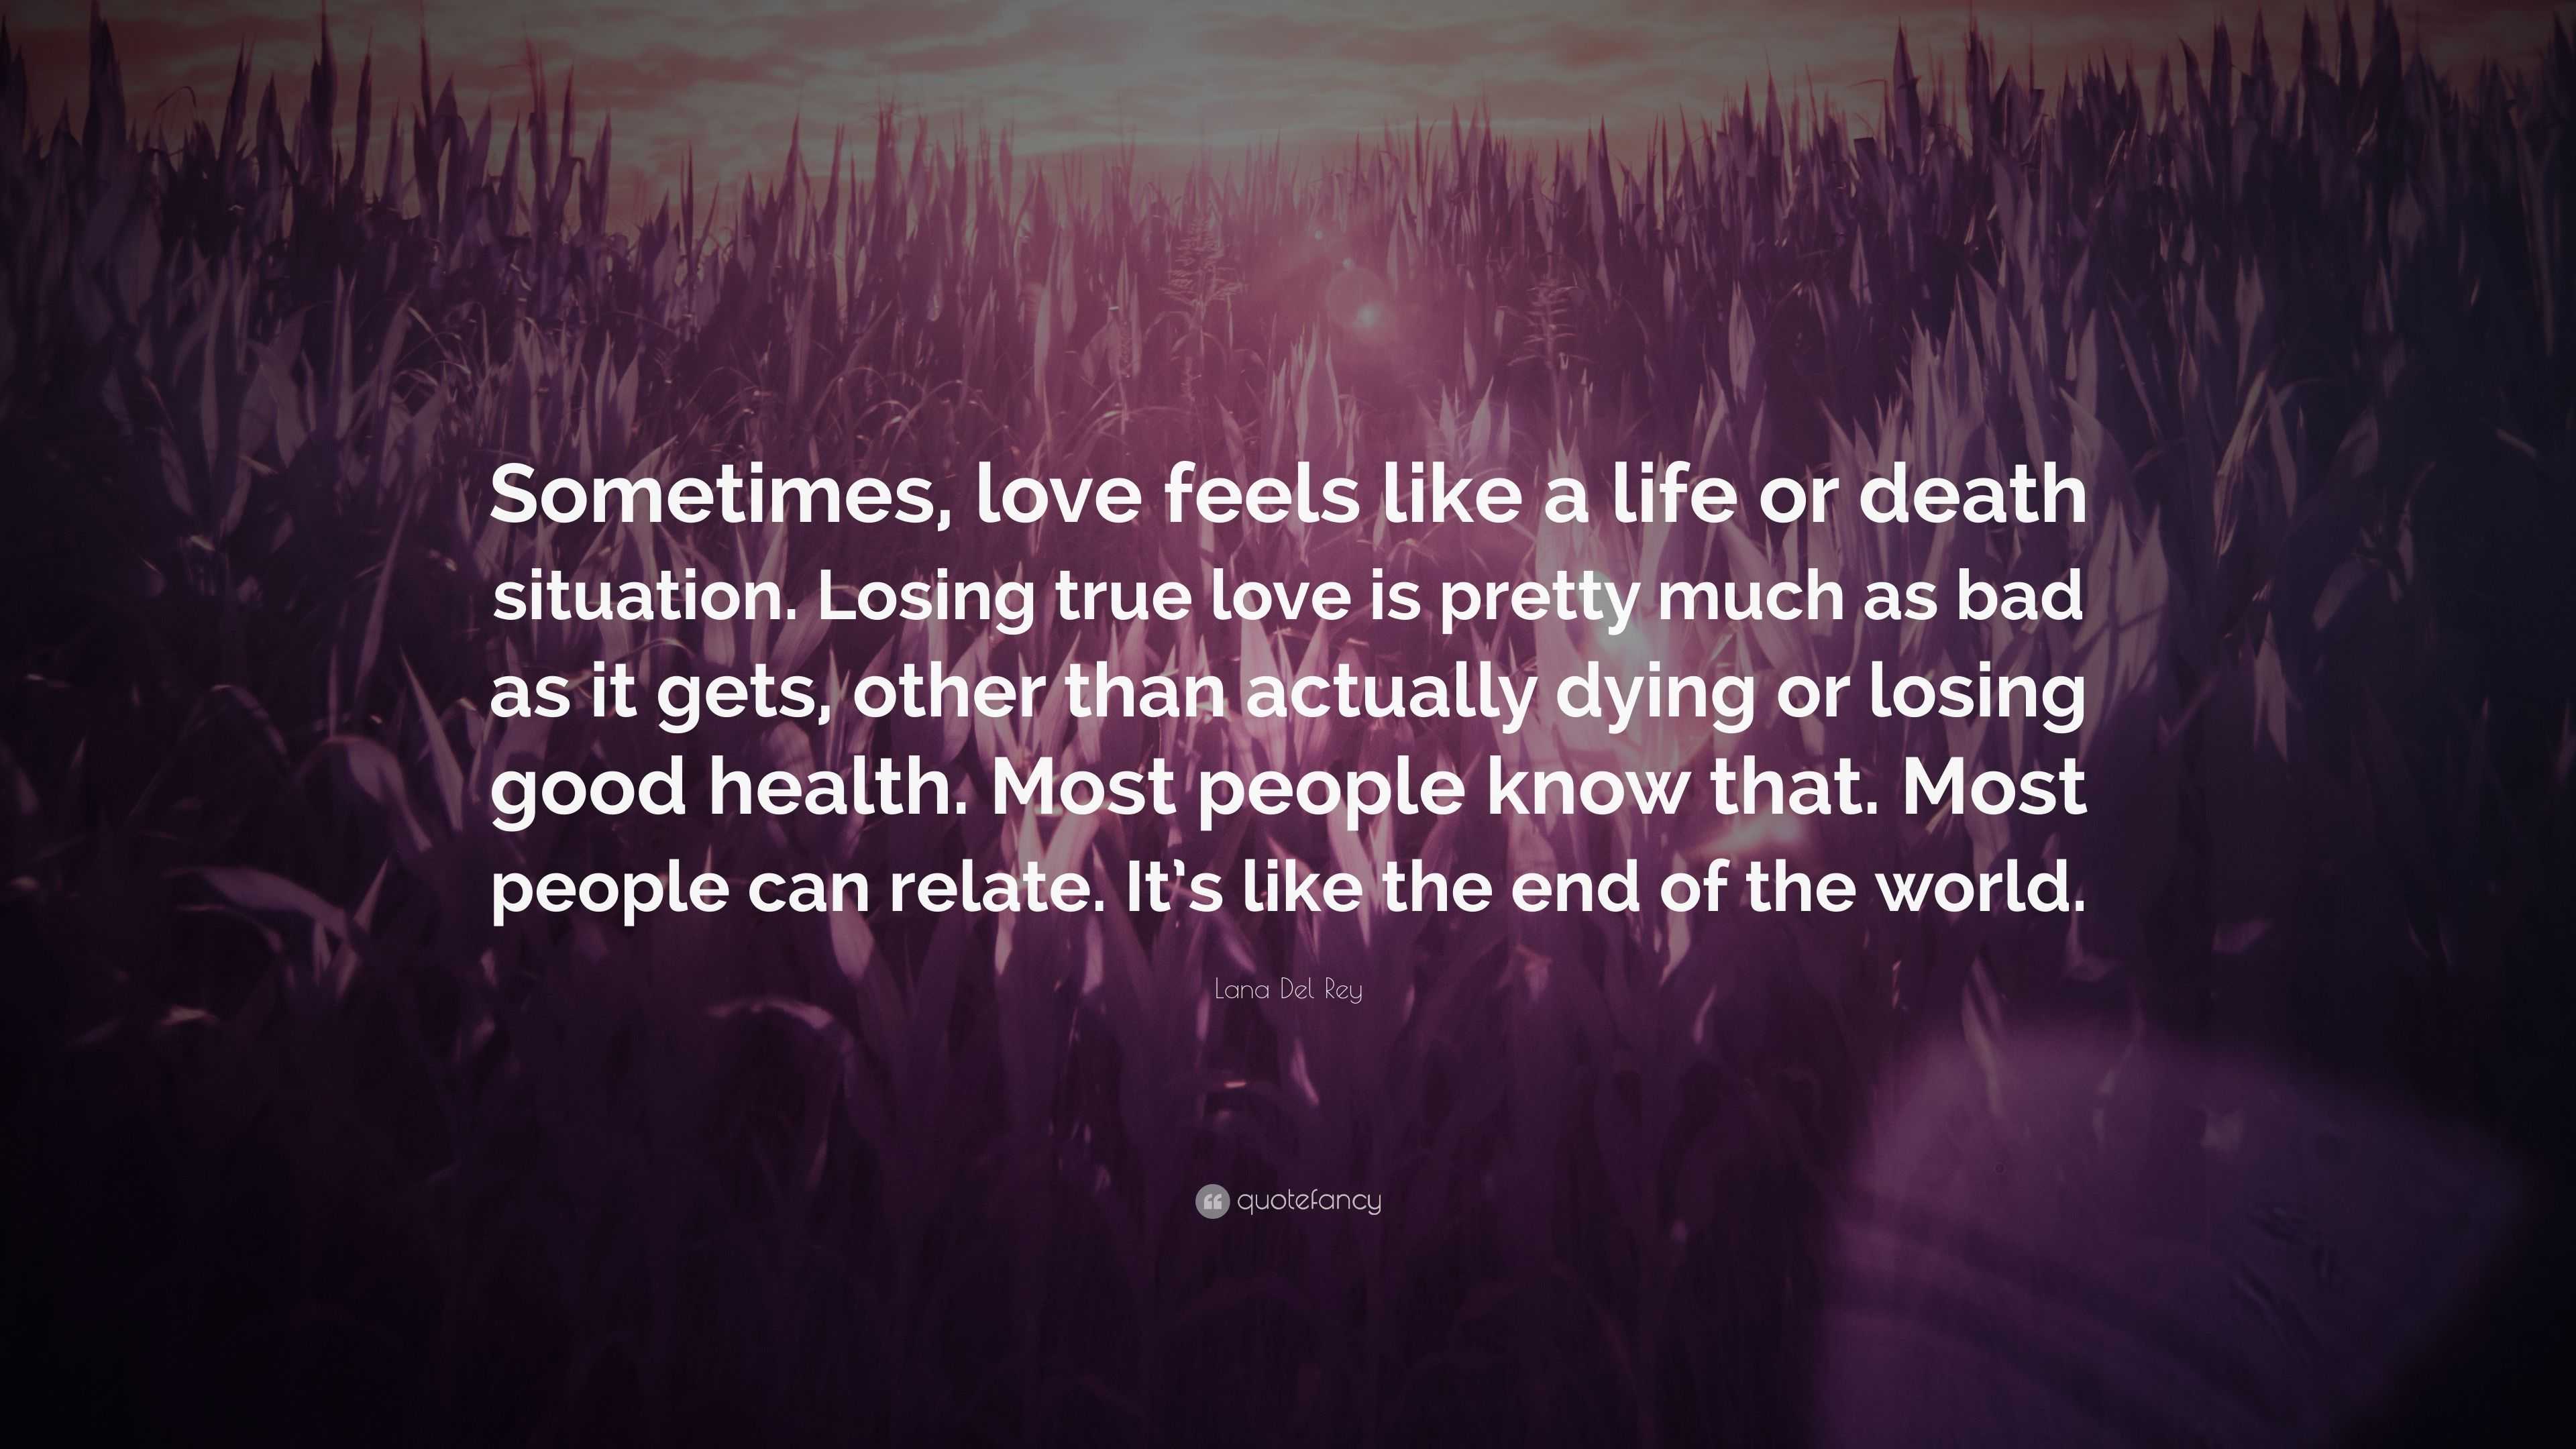 Lana Del Rey Quote “Sometimes love feels like a life or situation